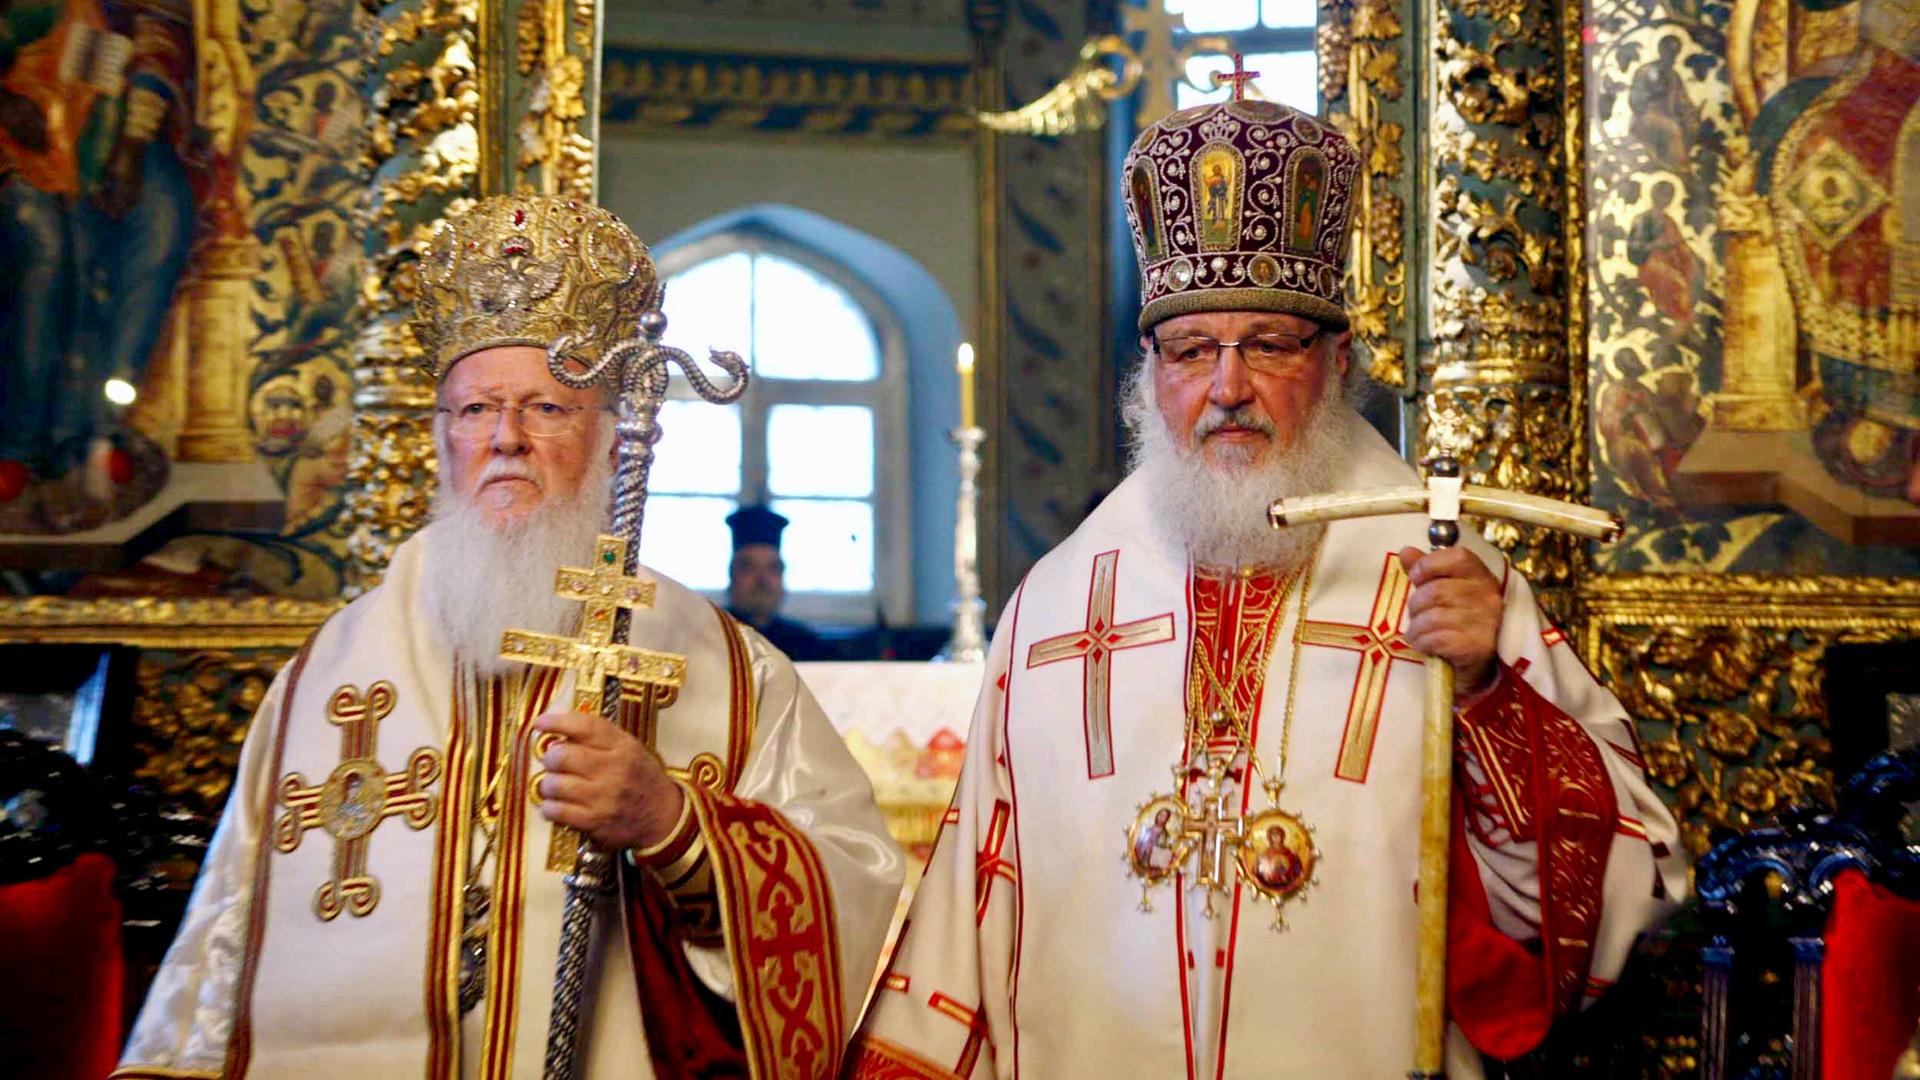 In this photo from 2009, the Ecumenical Patriarch, Bartholomew I (left) and Russian Orthodox Patriarch Kirill stand side-by-side during a Sunday service in the Patriarchal Cathedral of St. George at the Ecumenical Orthodox Patriarchate in Istanbul, Turkey